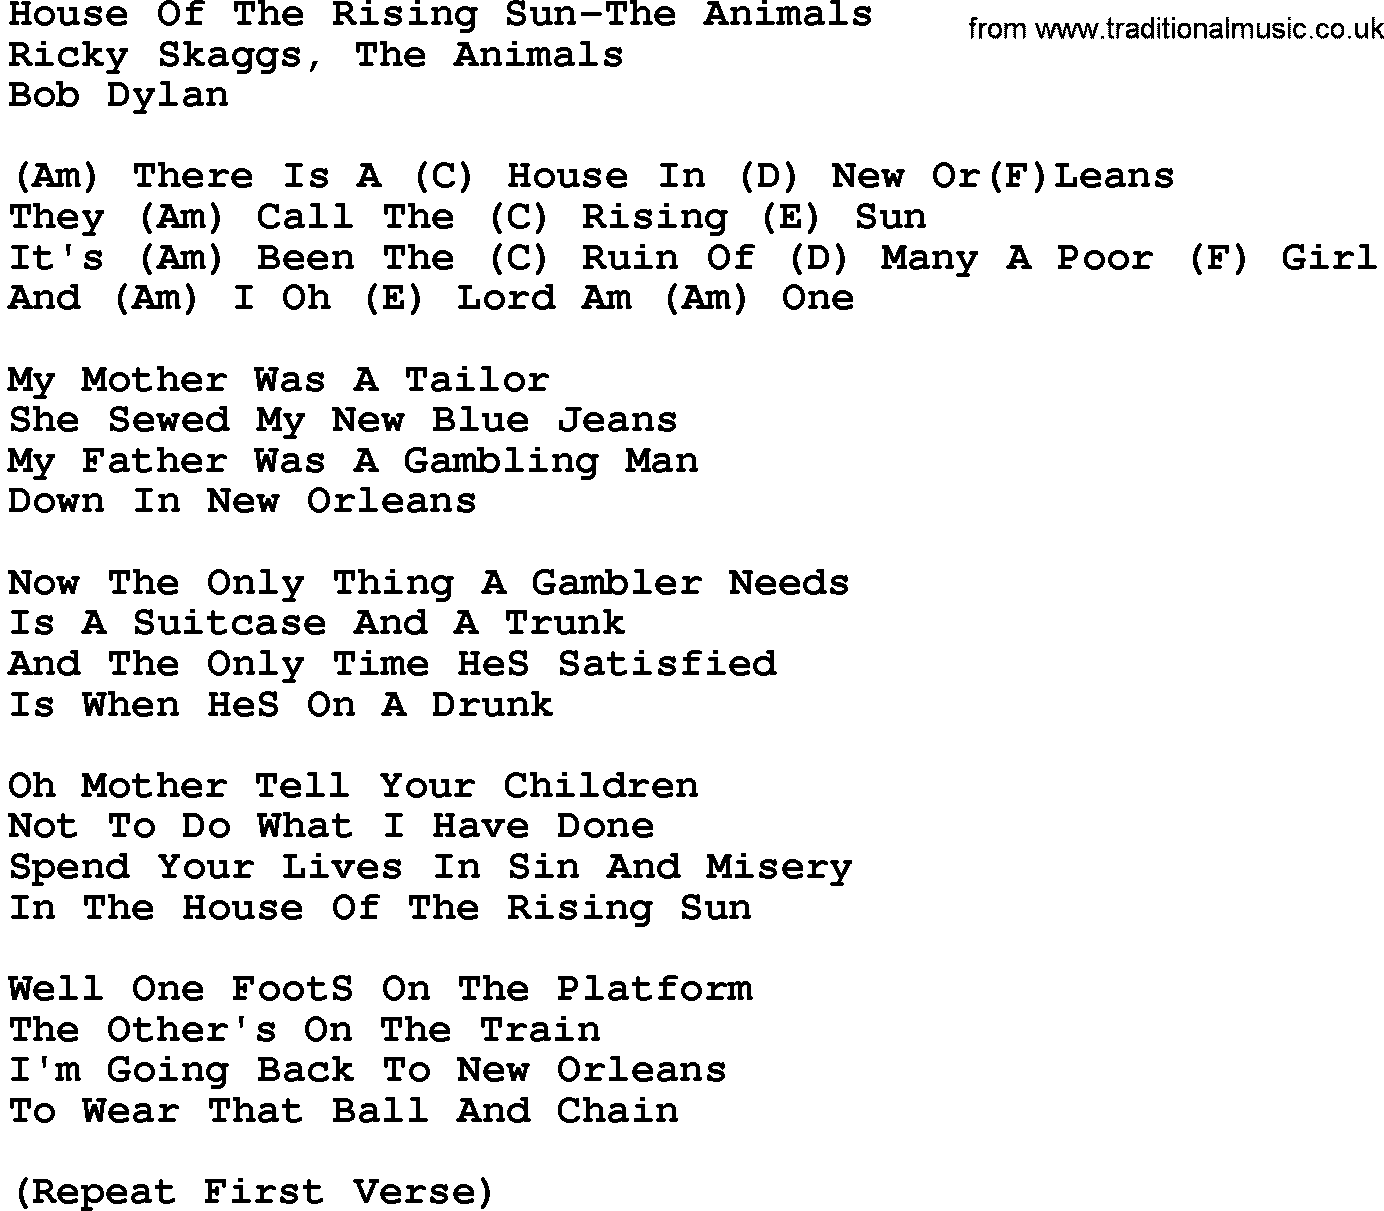 Country music song: House Of The Rising Sun-The Animals lyrics and chords